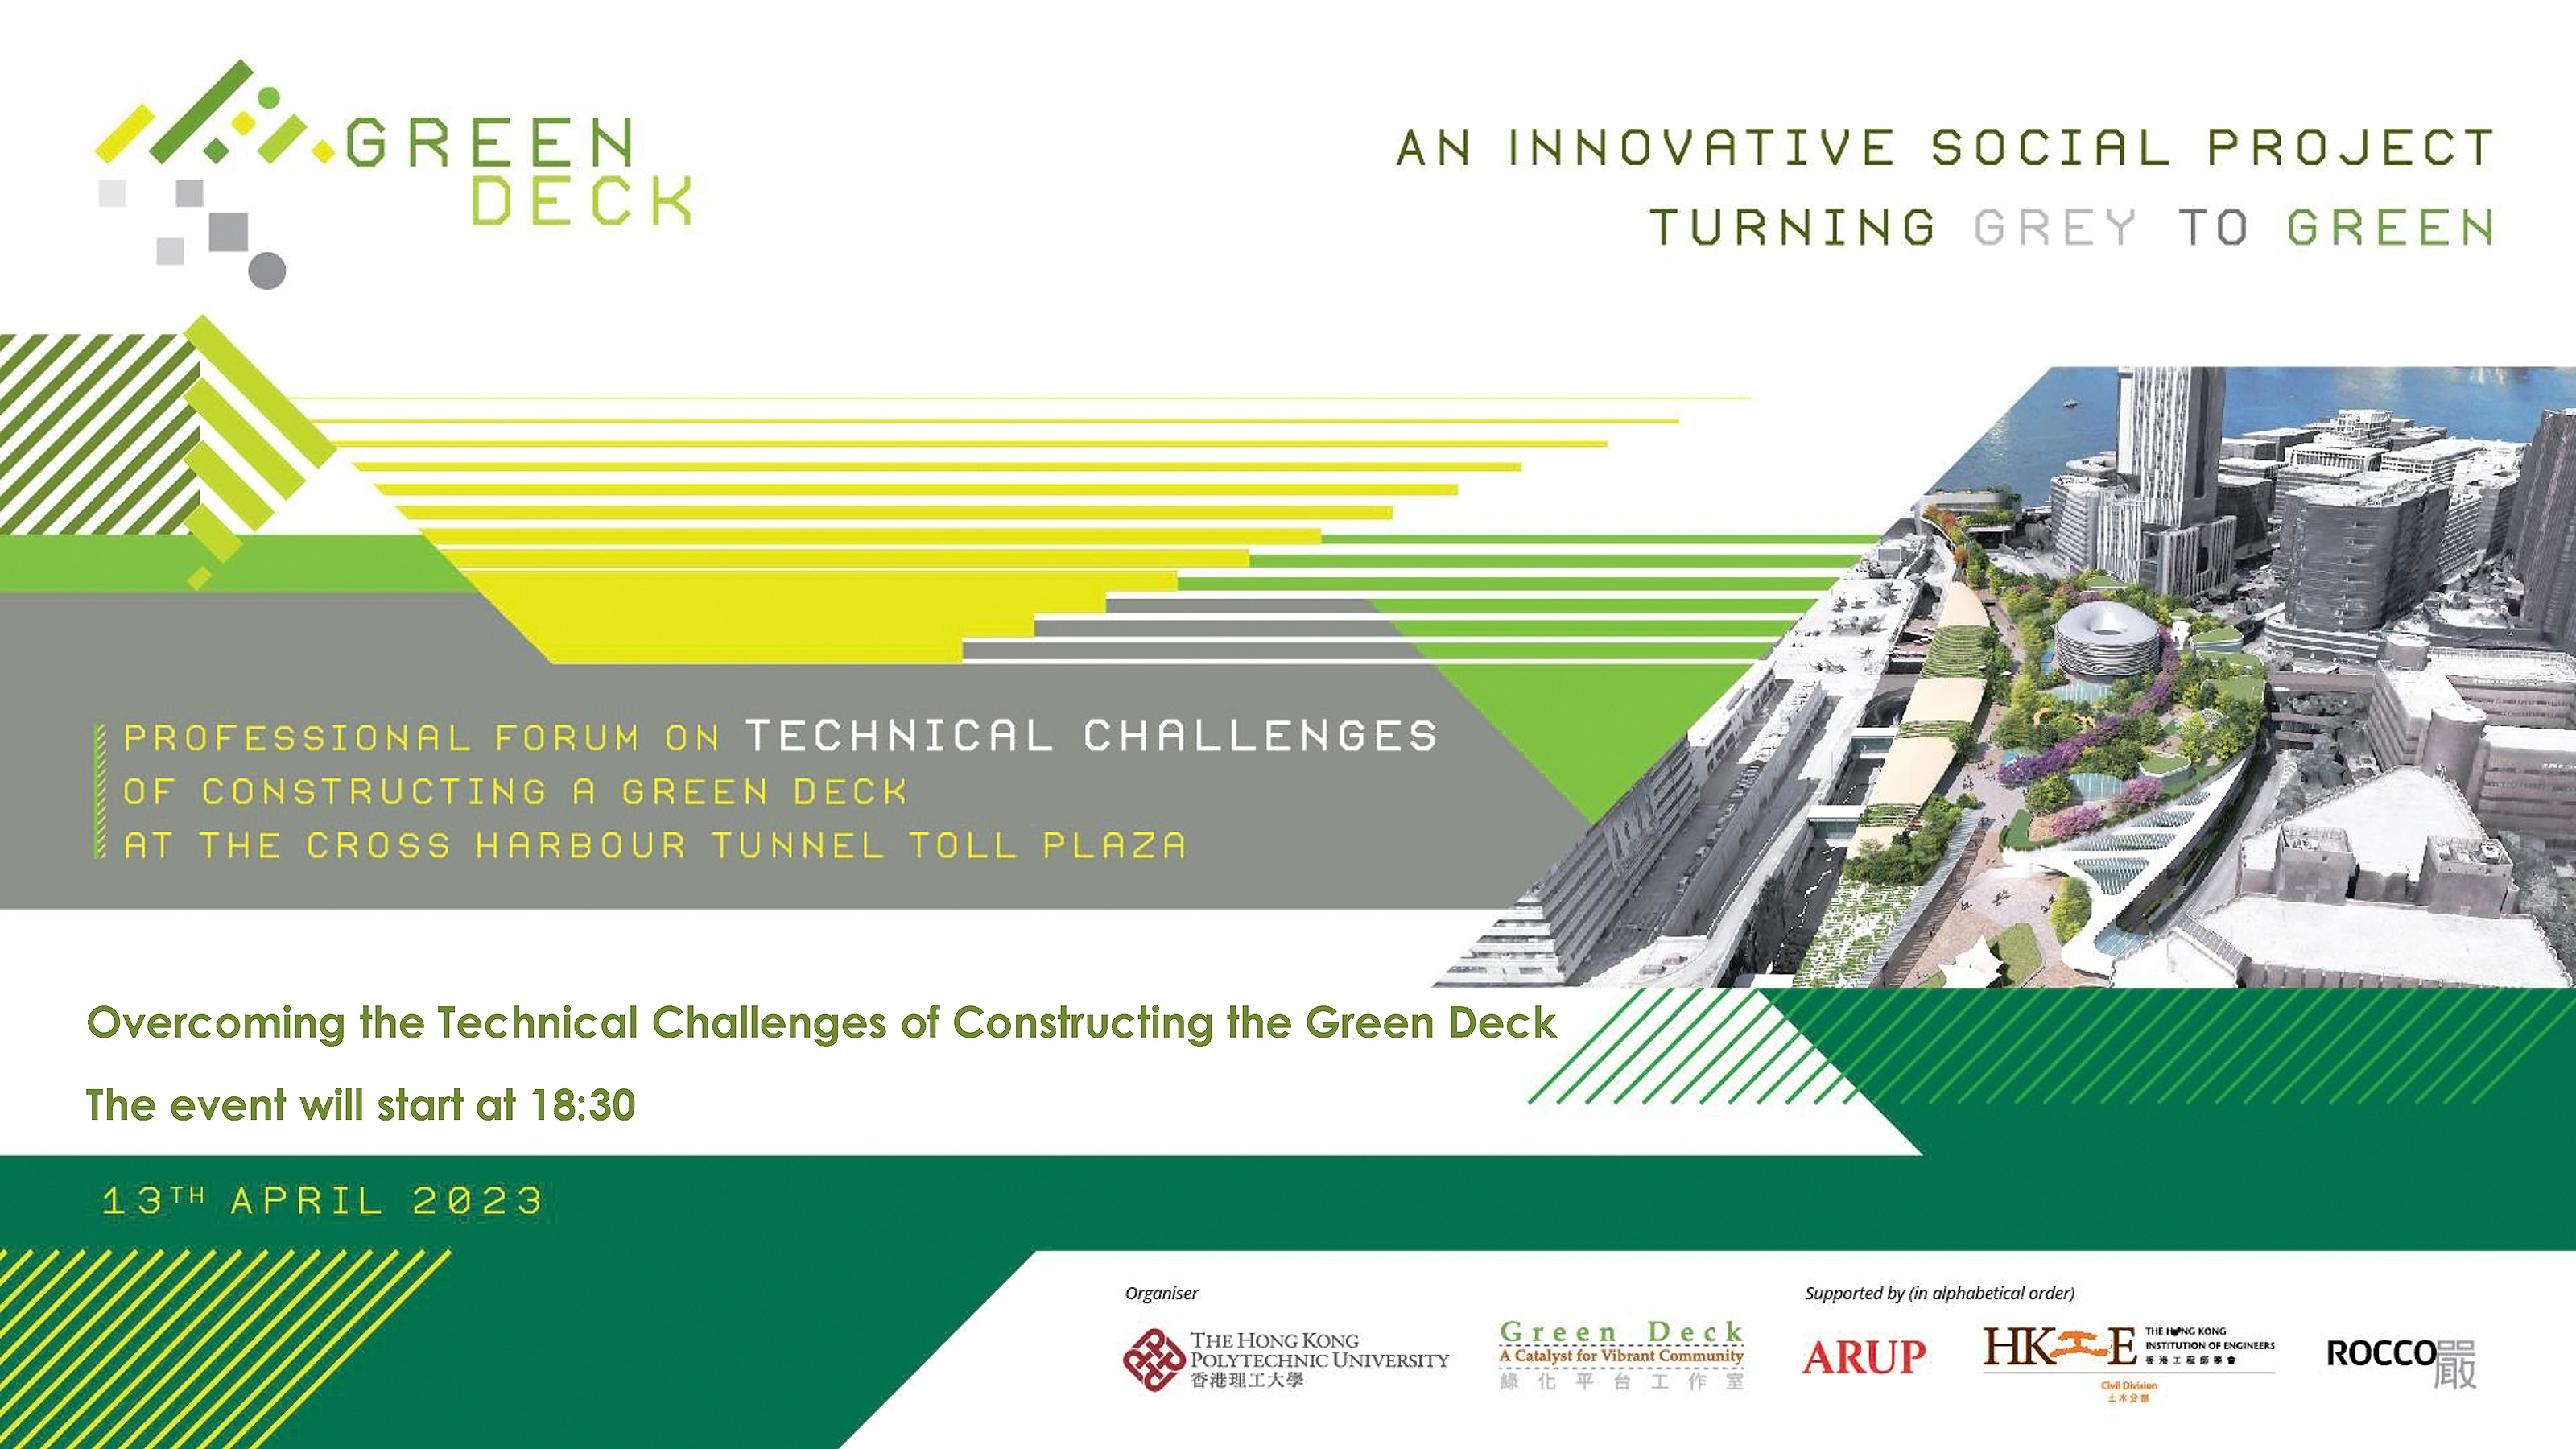 Professional Forum on Technical Challenges of Constructing a Green Deck at the Cross Harbour Tunnel Toll Plaza